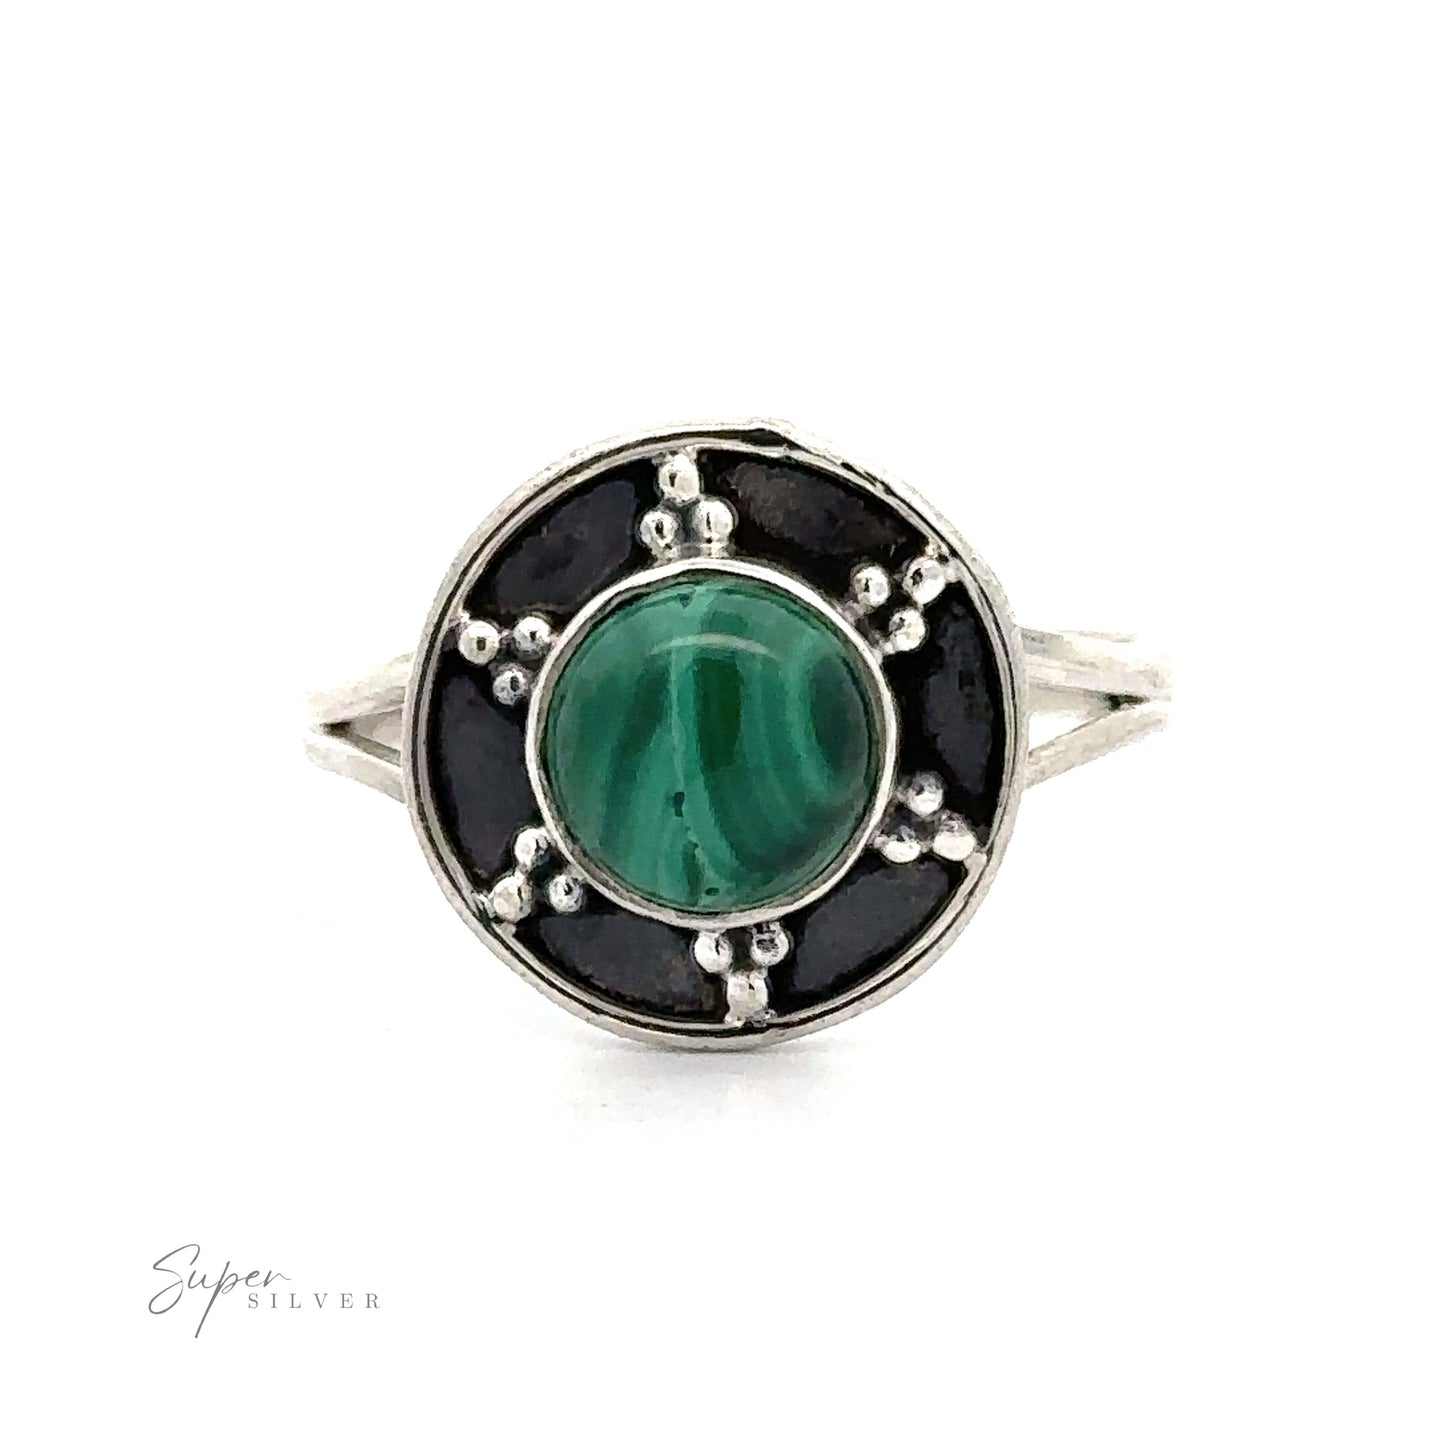 
                  
                    A Gemstone Ring With Unique Oxidized Design featuring a polished green stone centrally set within a circular black and oxidized silver ornate band.
                  
                